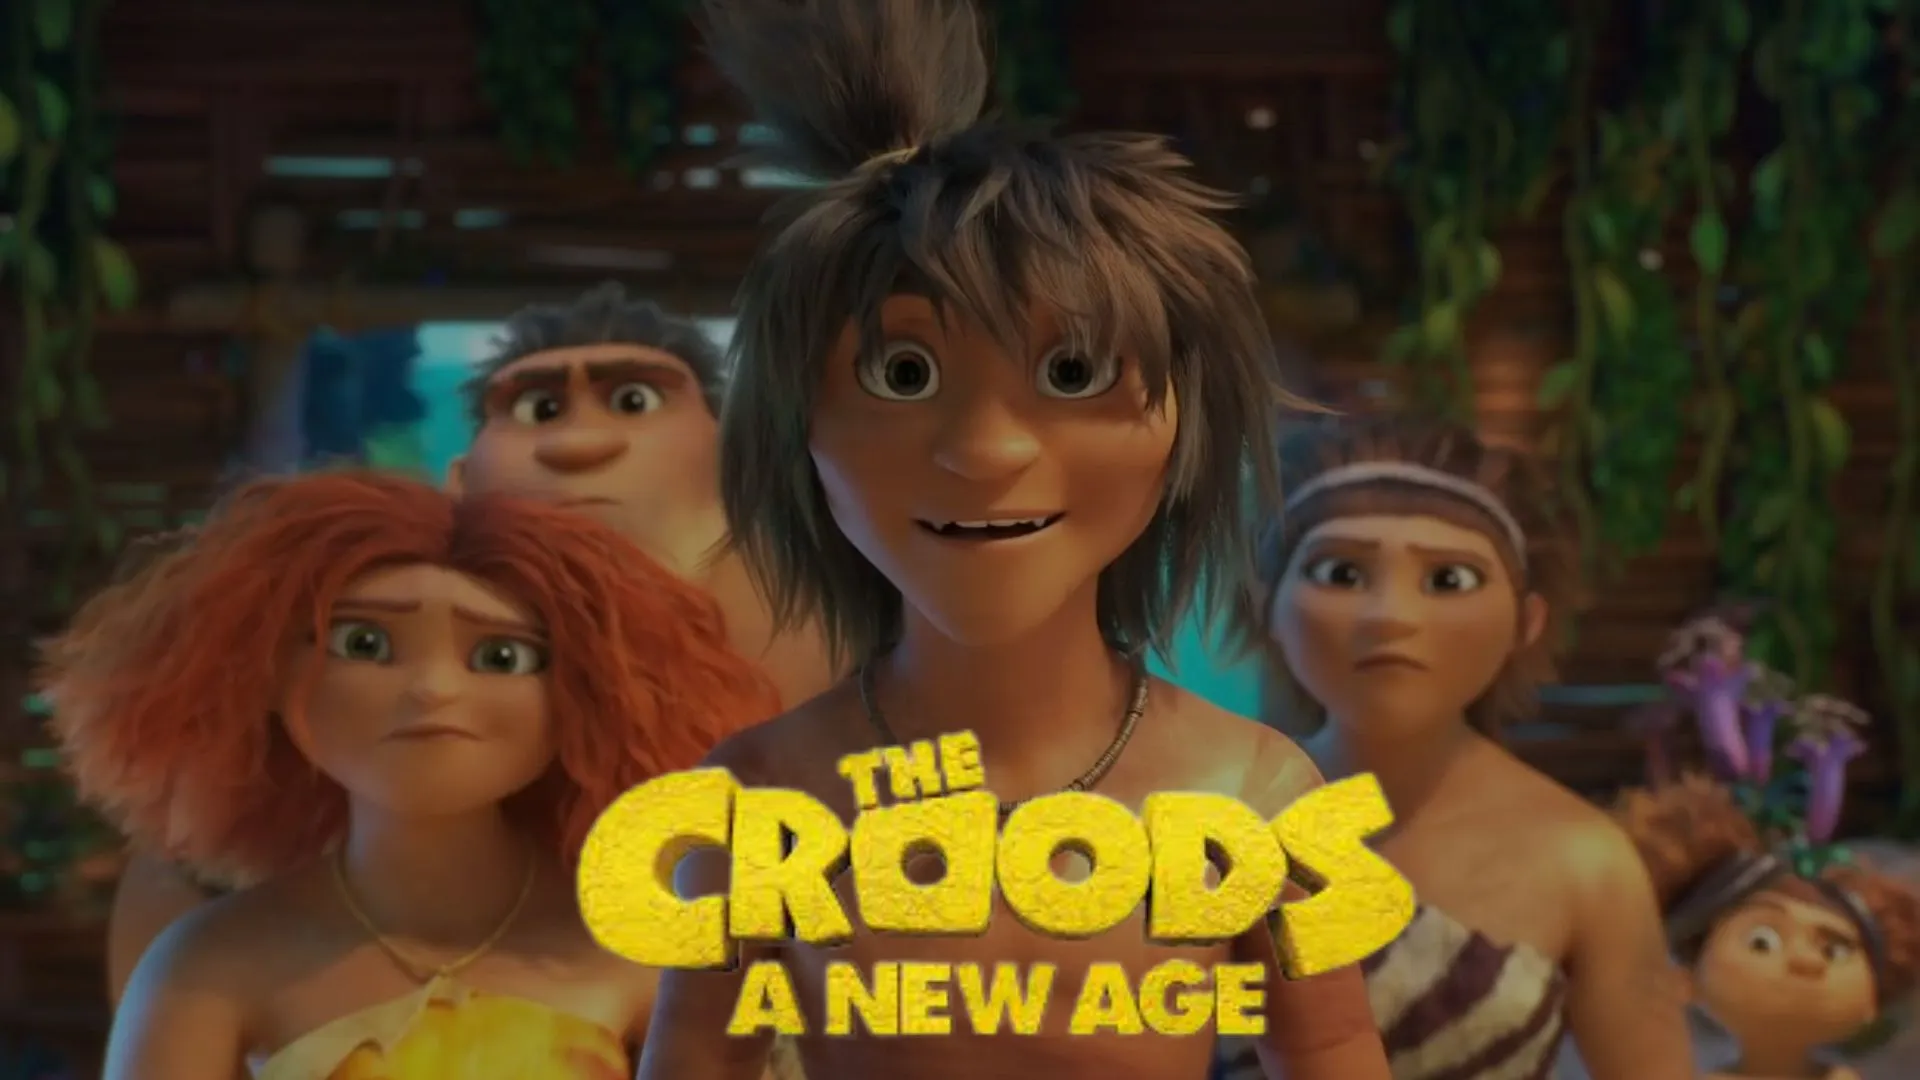 The Croods: A New Age Parents Guide